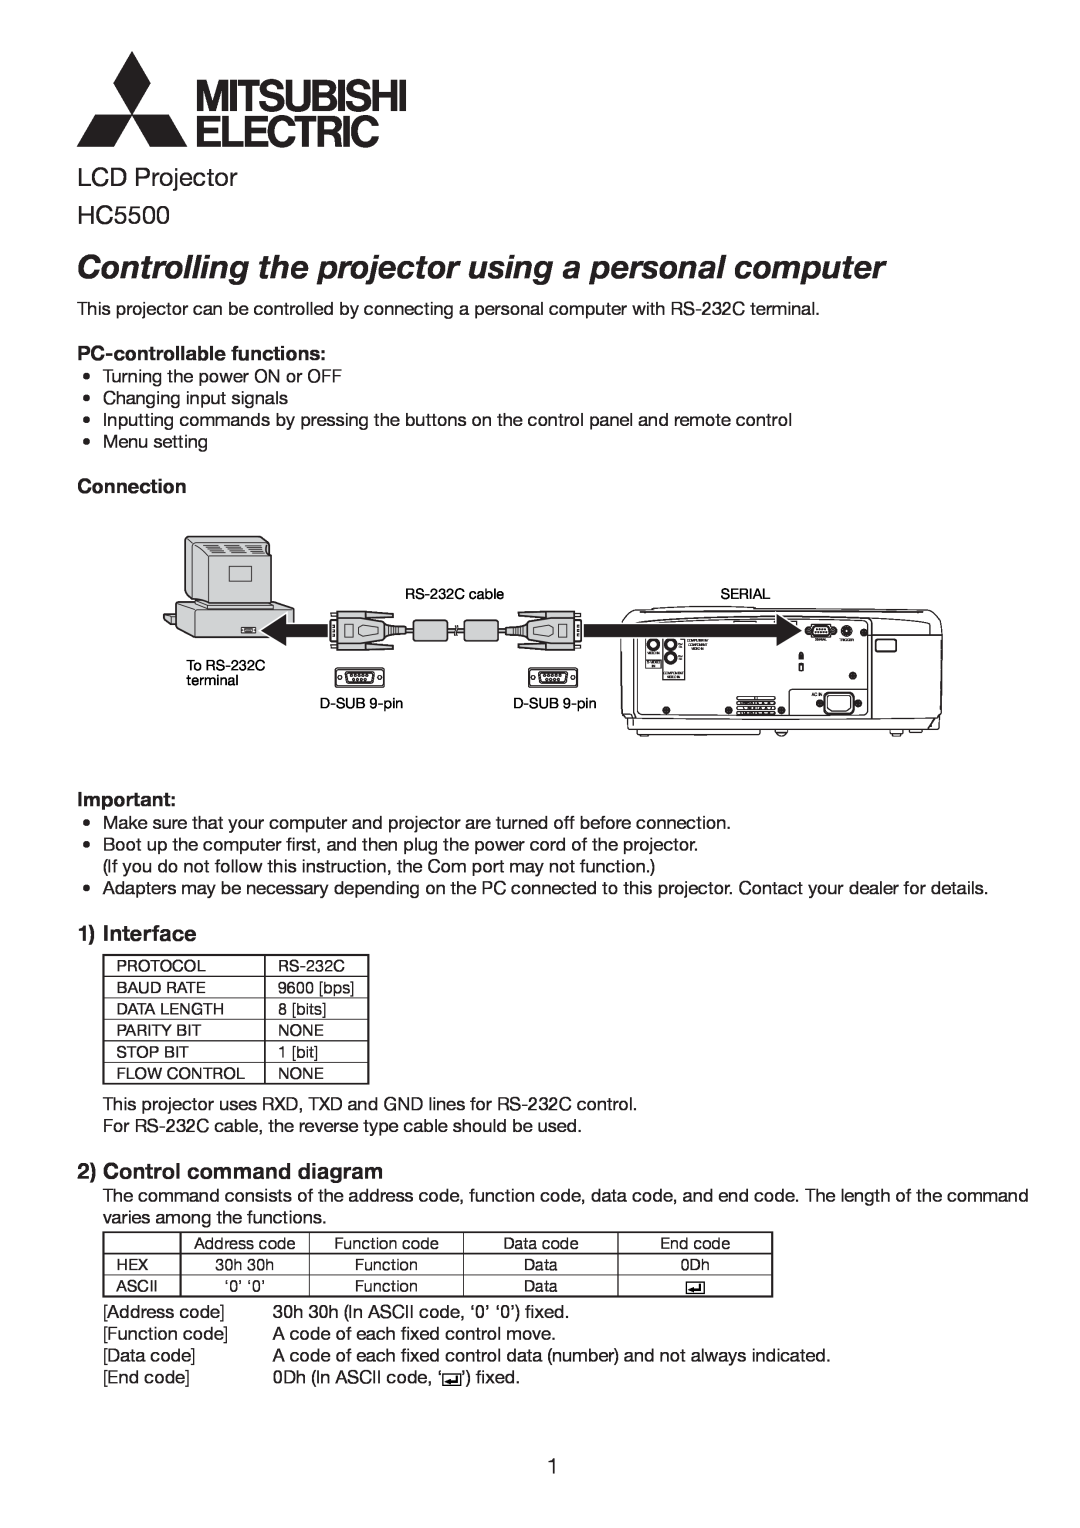 Mitsubishi Electronics HC5500 manual Interface, Control command diagram, PC-controllable functions, Connection 